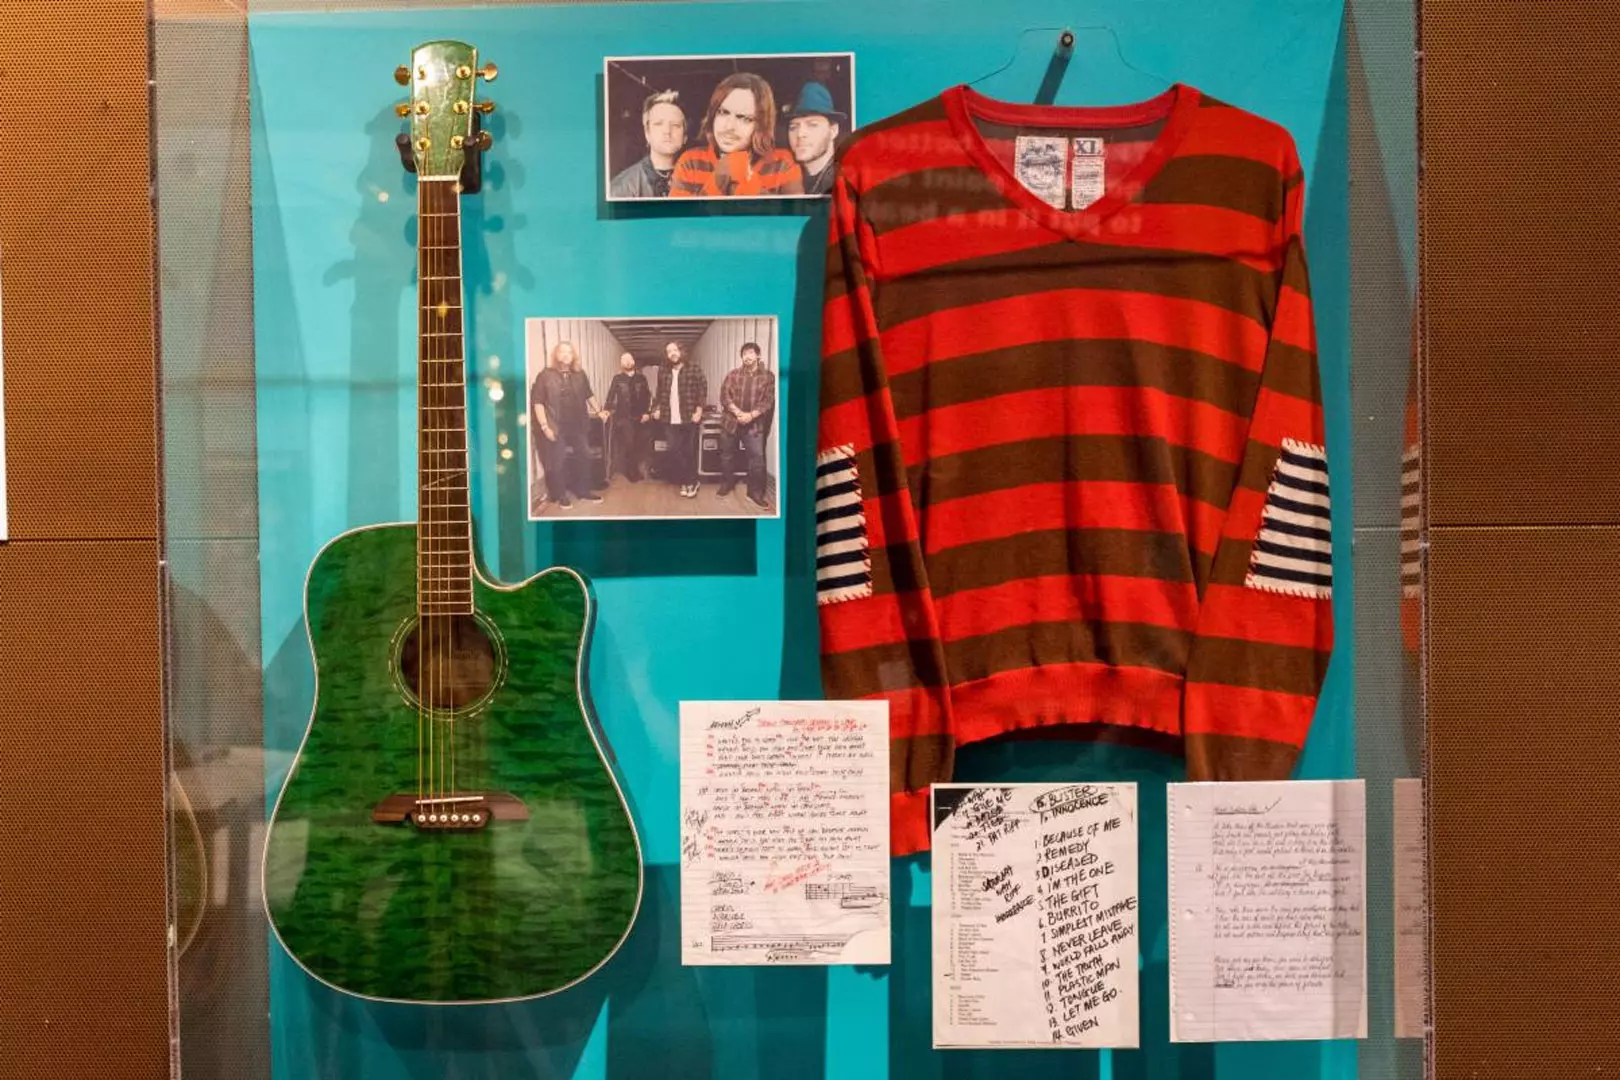 Seether Featured in Rock and Roll Hall of Fame Exhibit